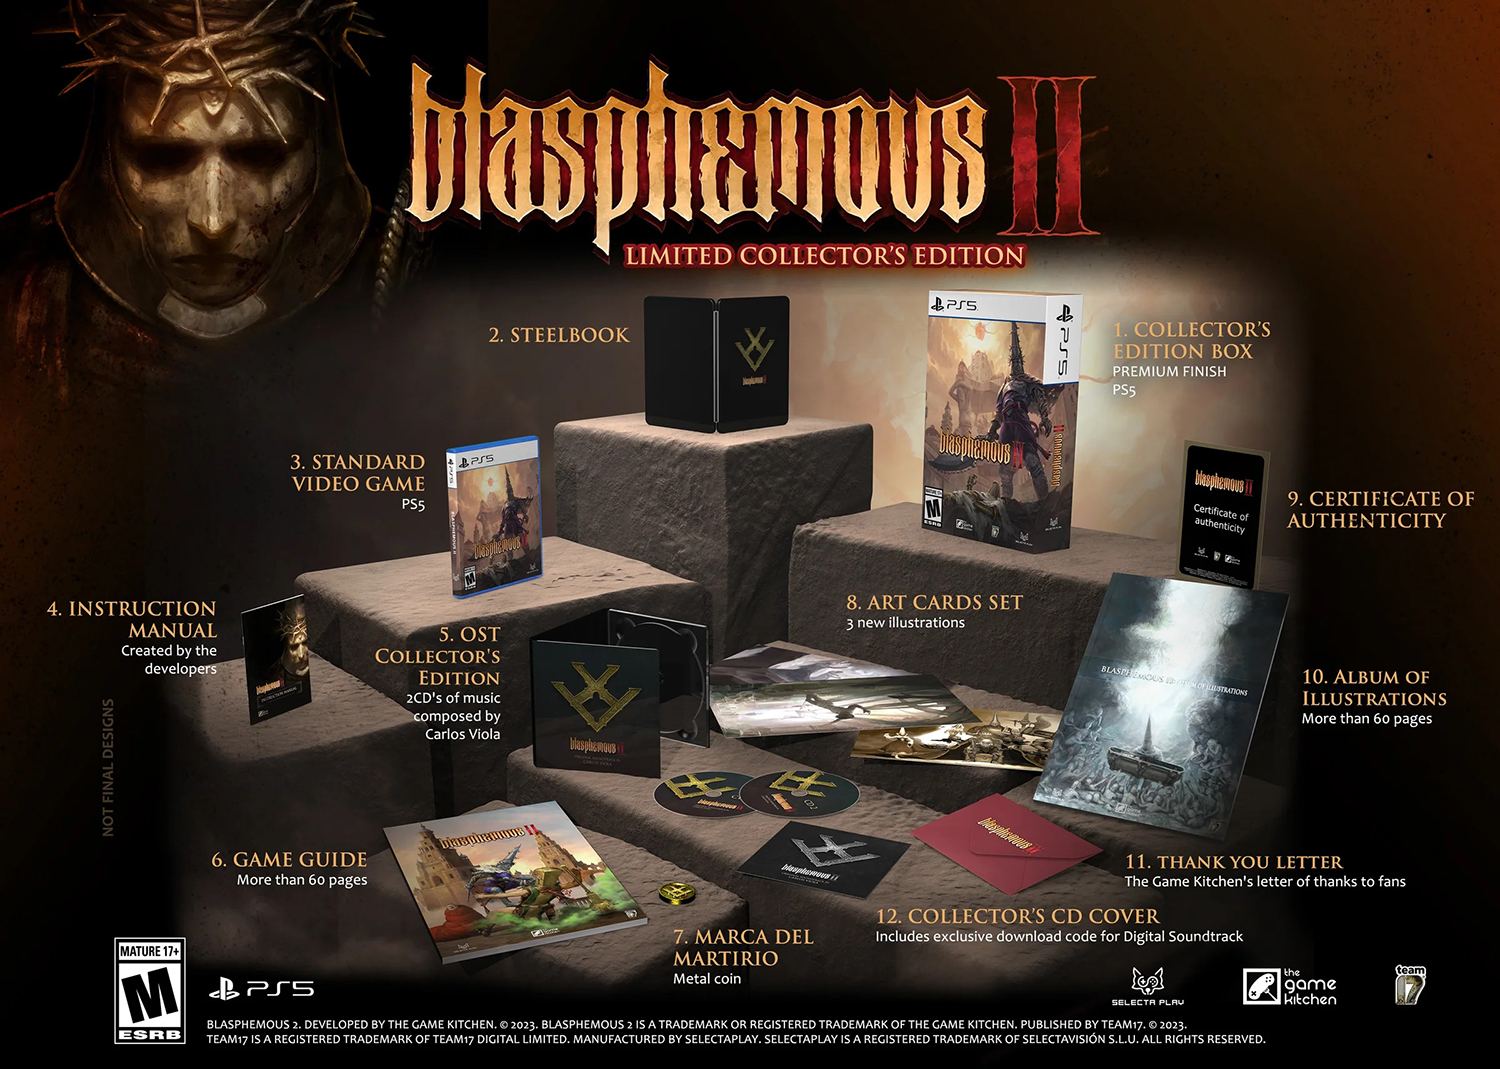 Blasphemous 2 [Limited Collector's Edition] for PlayStation 5